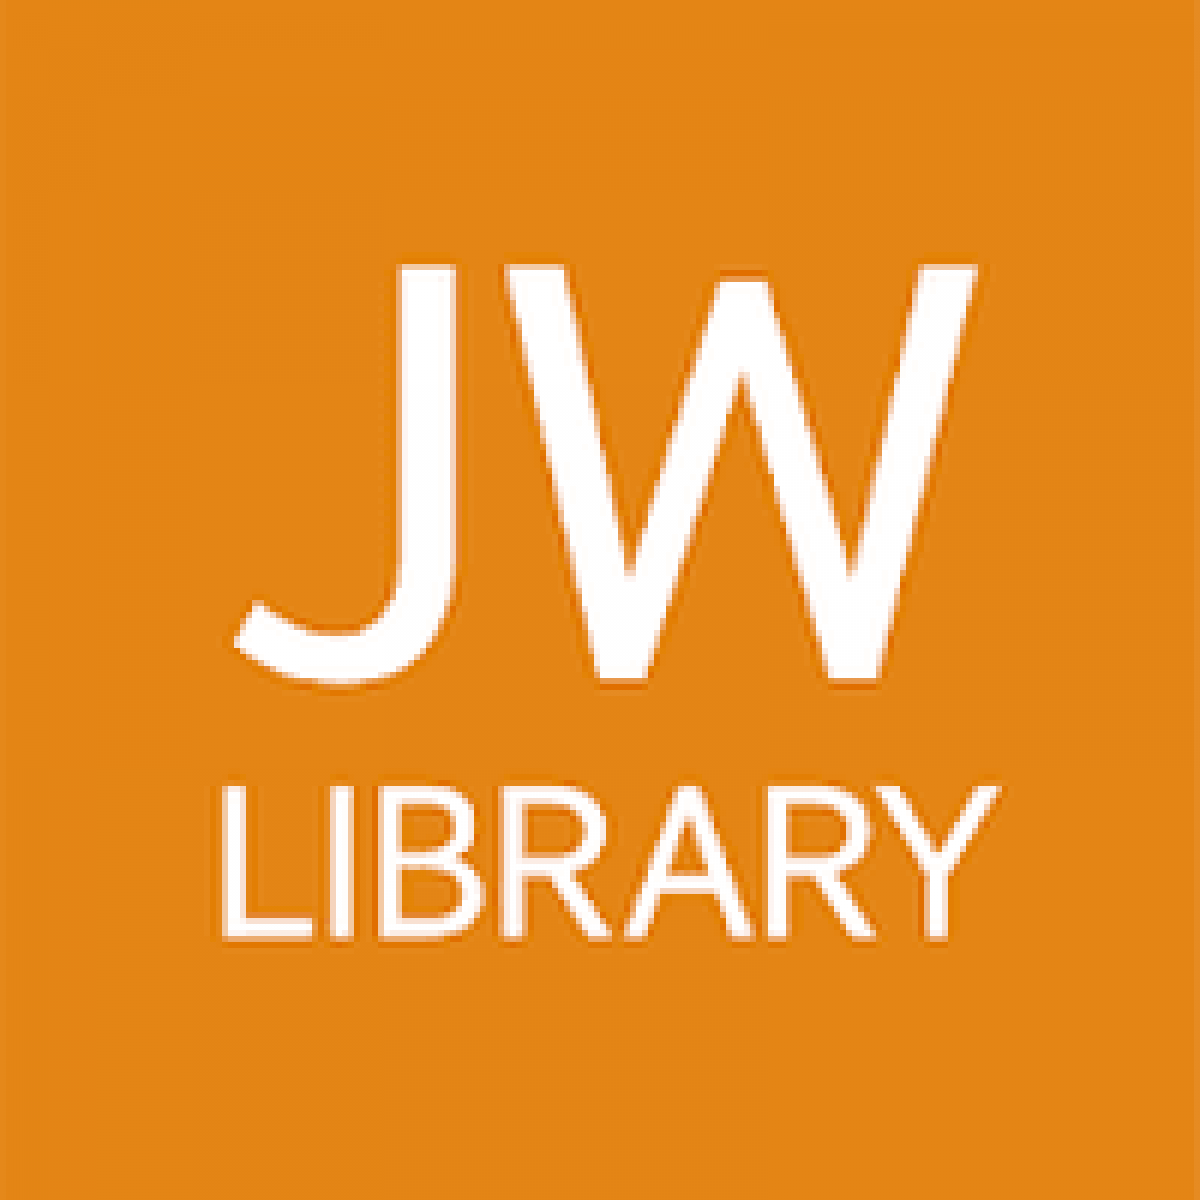 get help with jw library app on pc